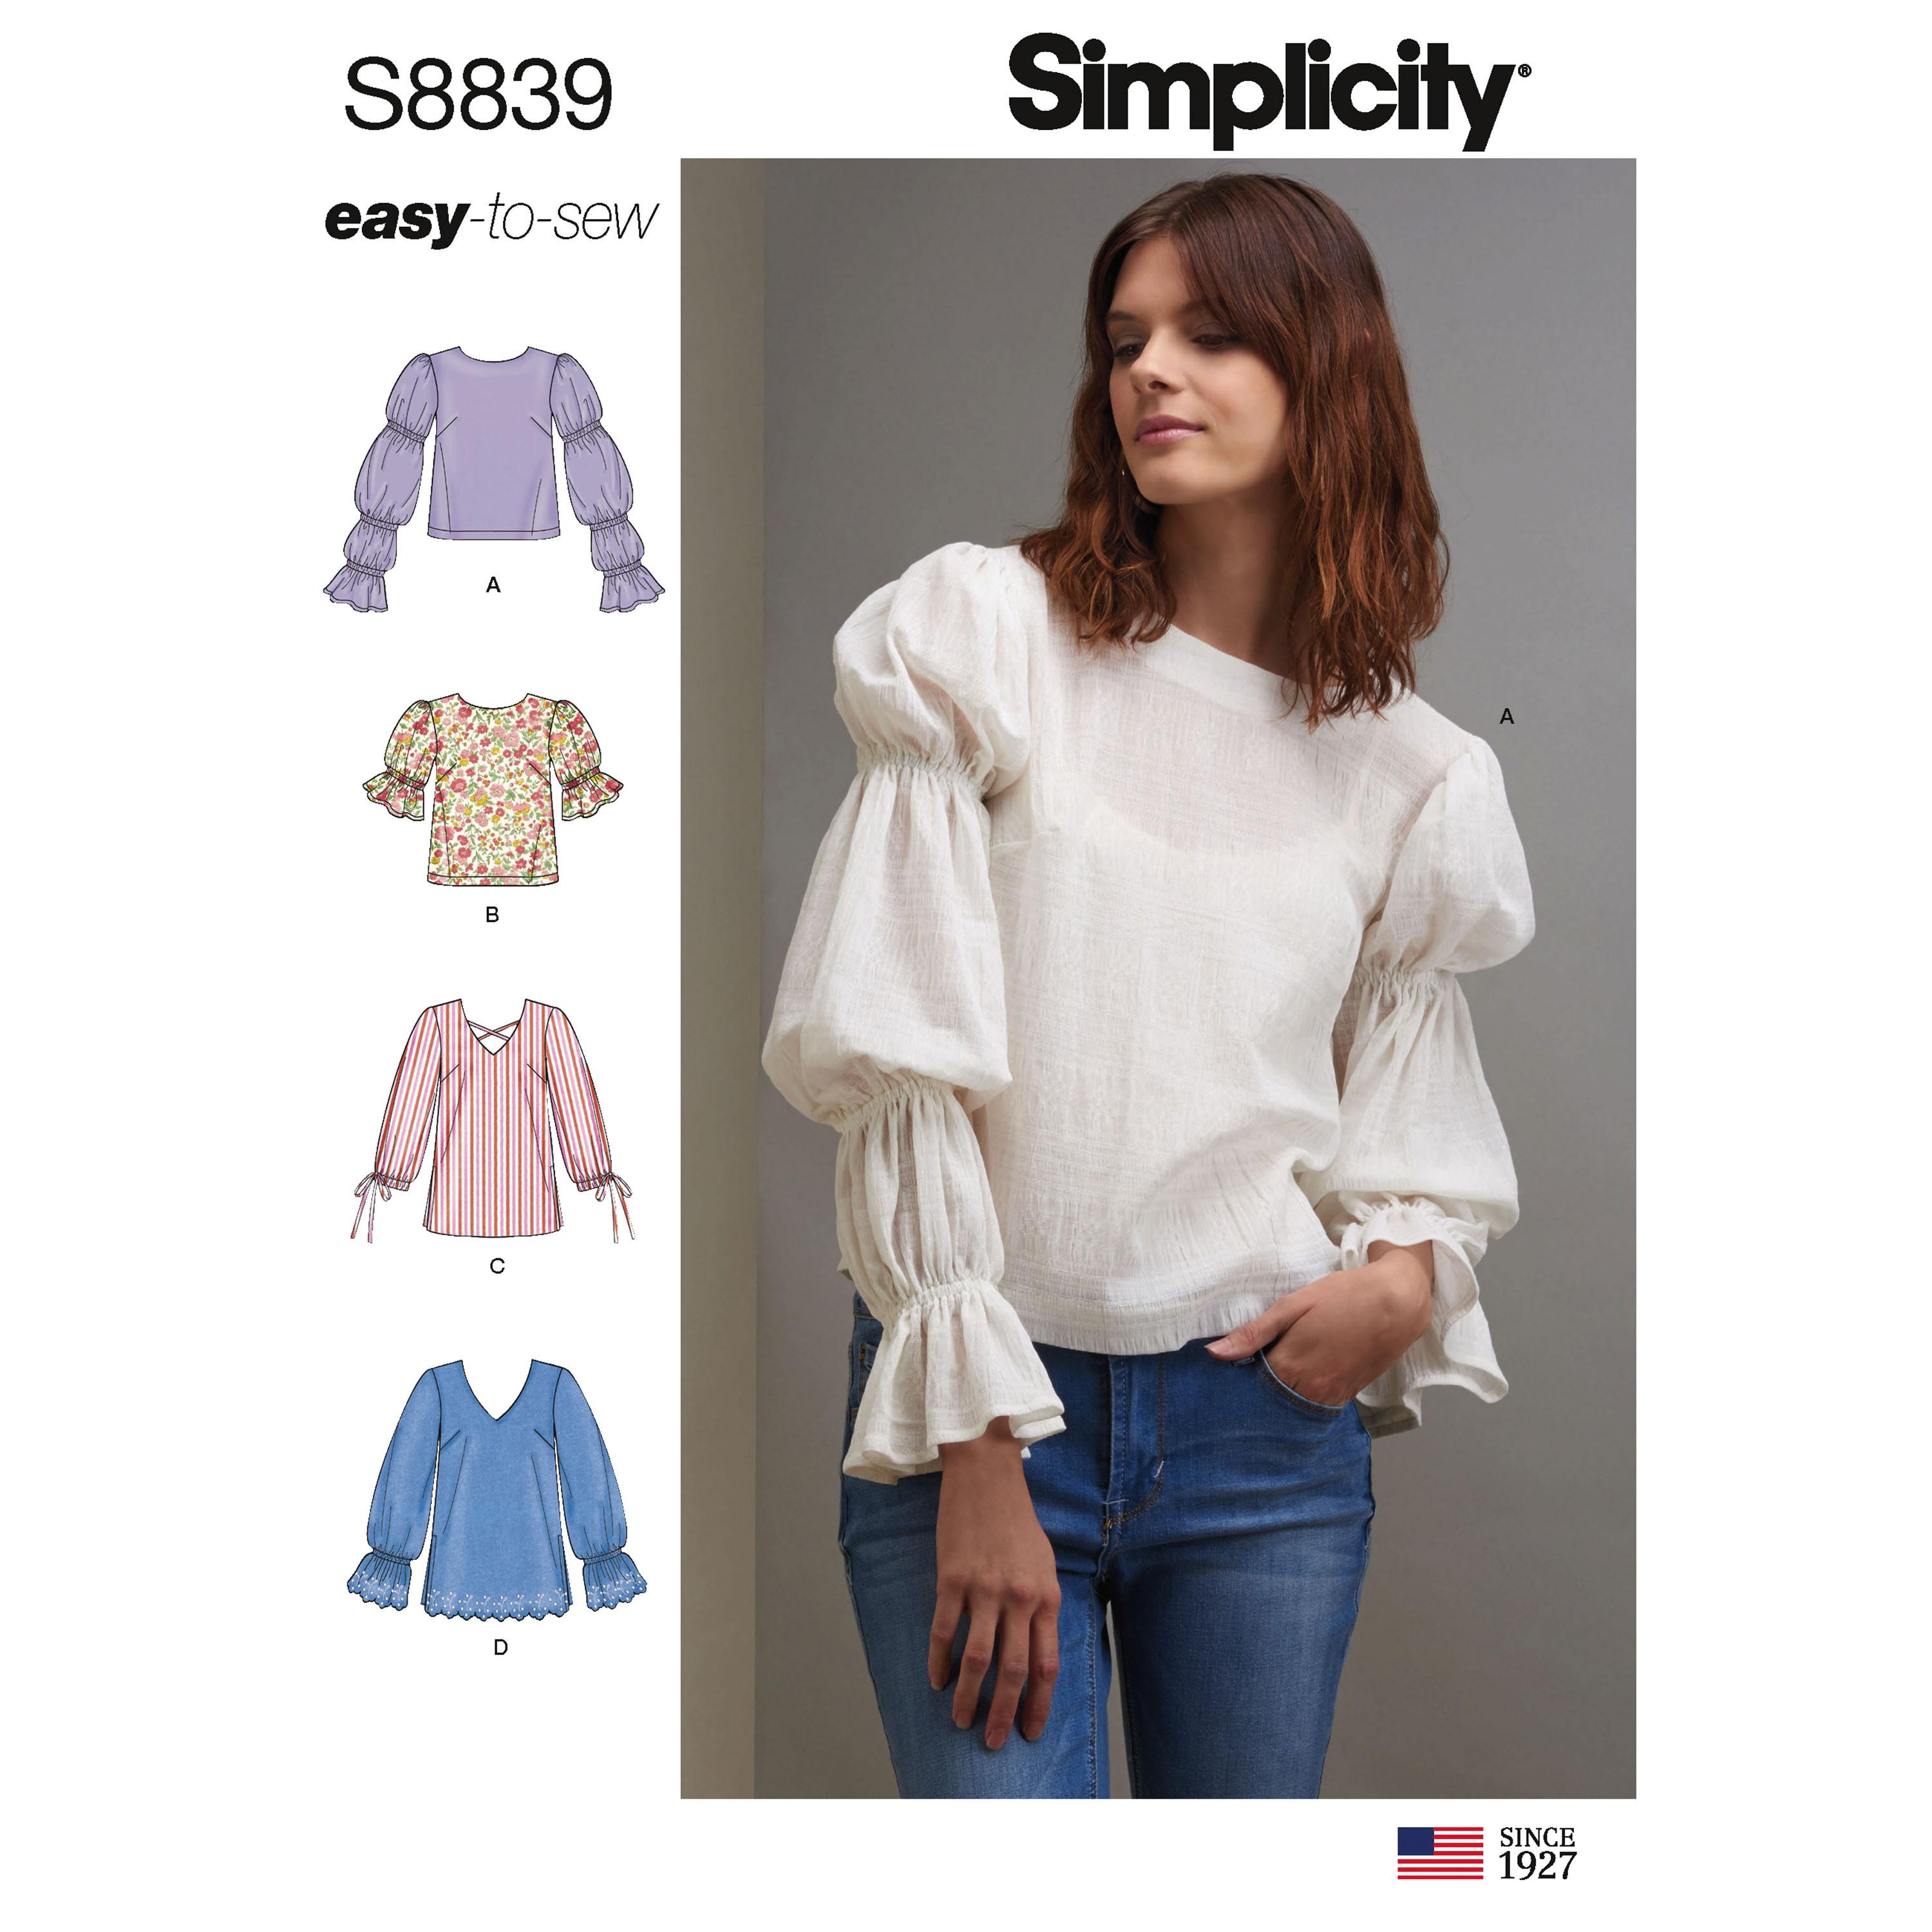 Simplicity 8839 Misses' Pullover Tunics and Tops